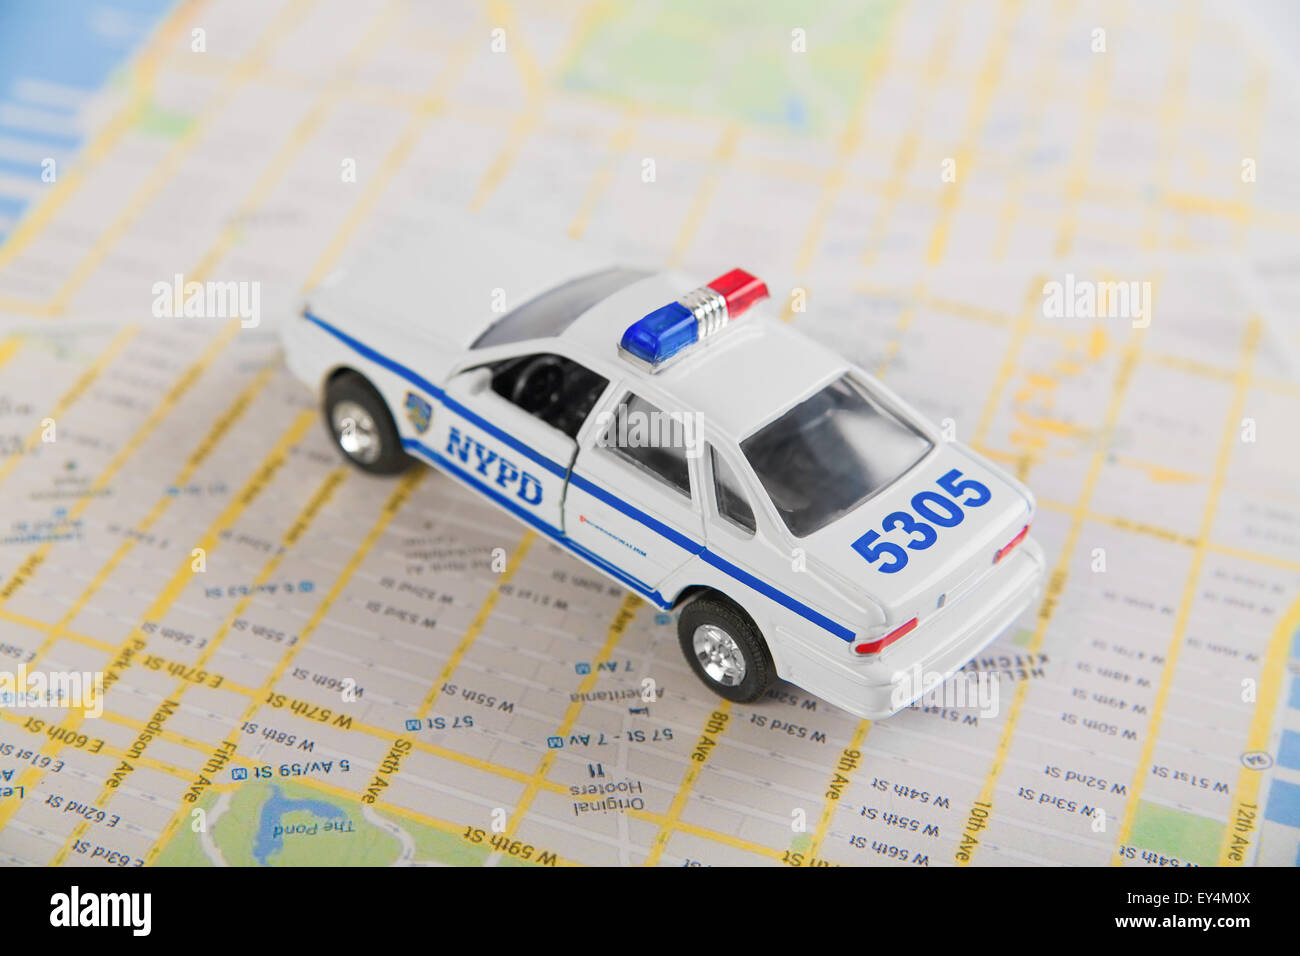 NYPD car and road map. Stock Photo